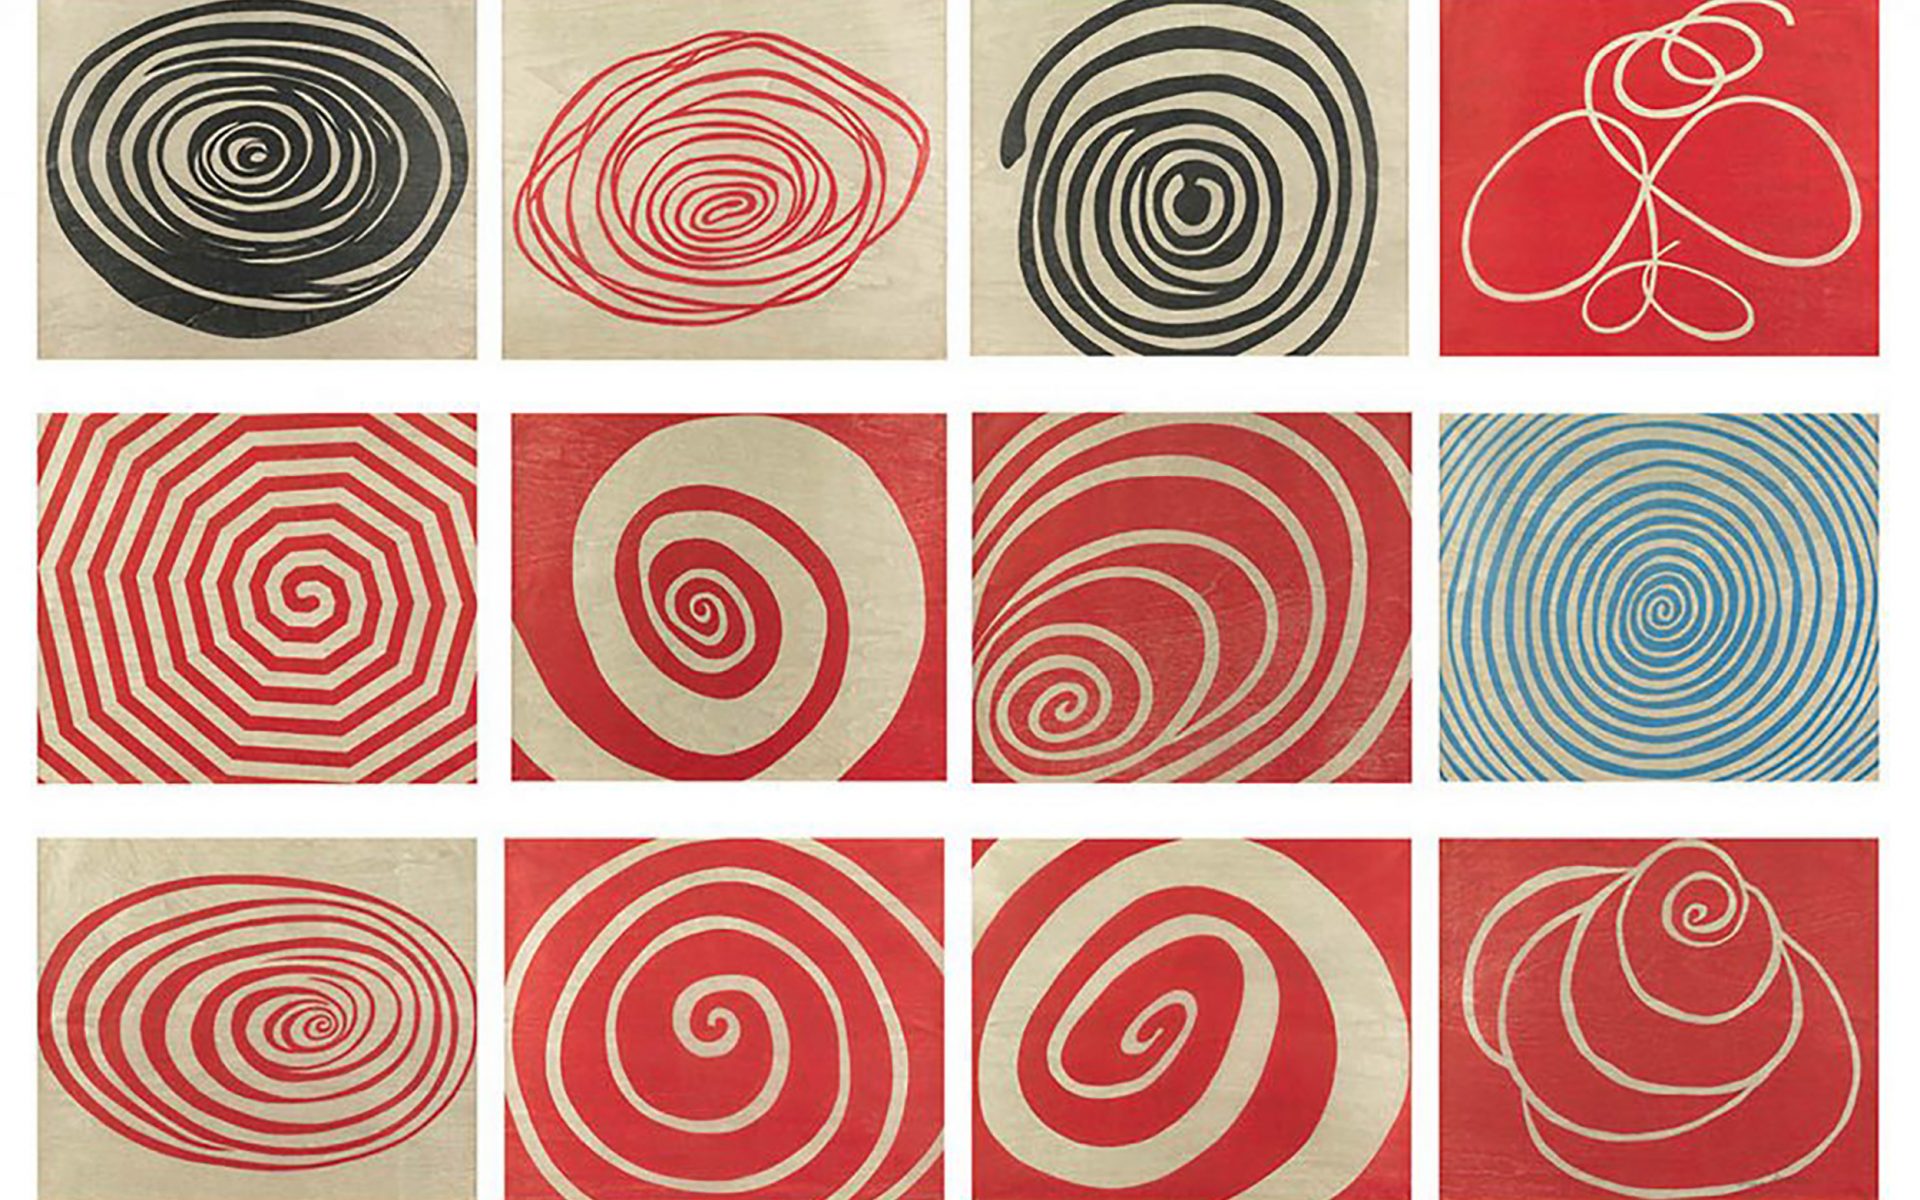 TAPESTRY TALES: LOUISE BOURGEOIS – Selvedge Magazine